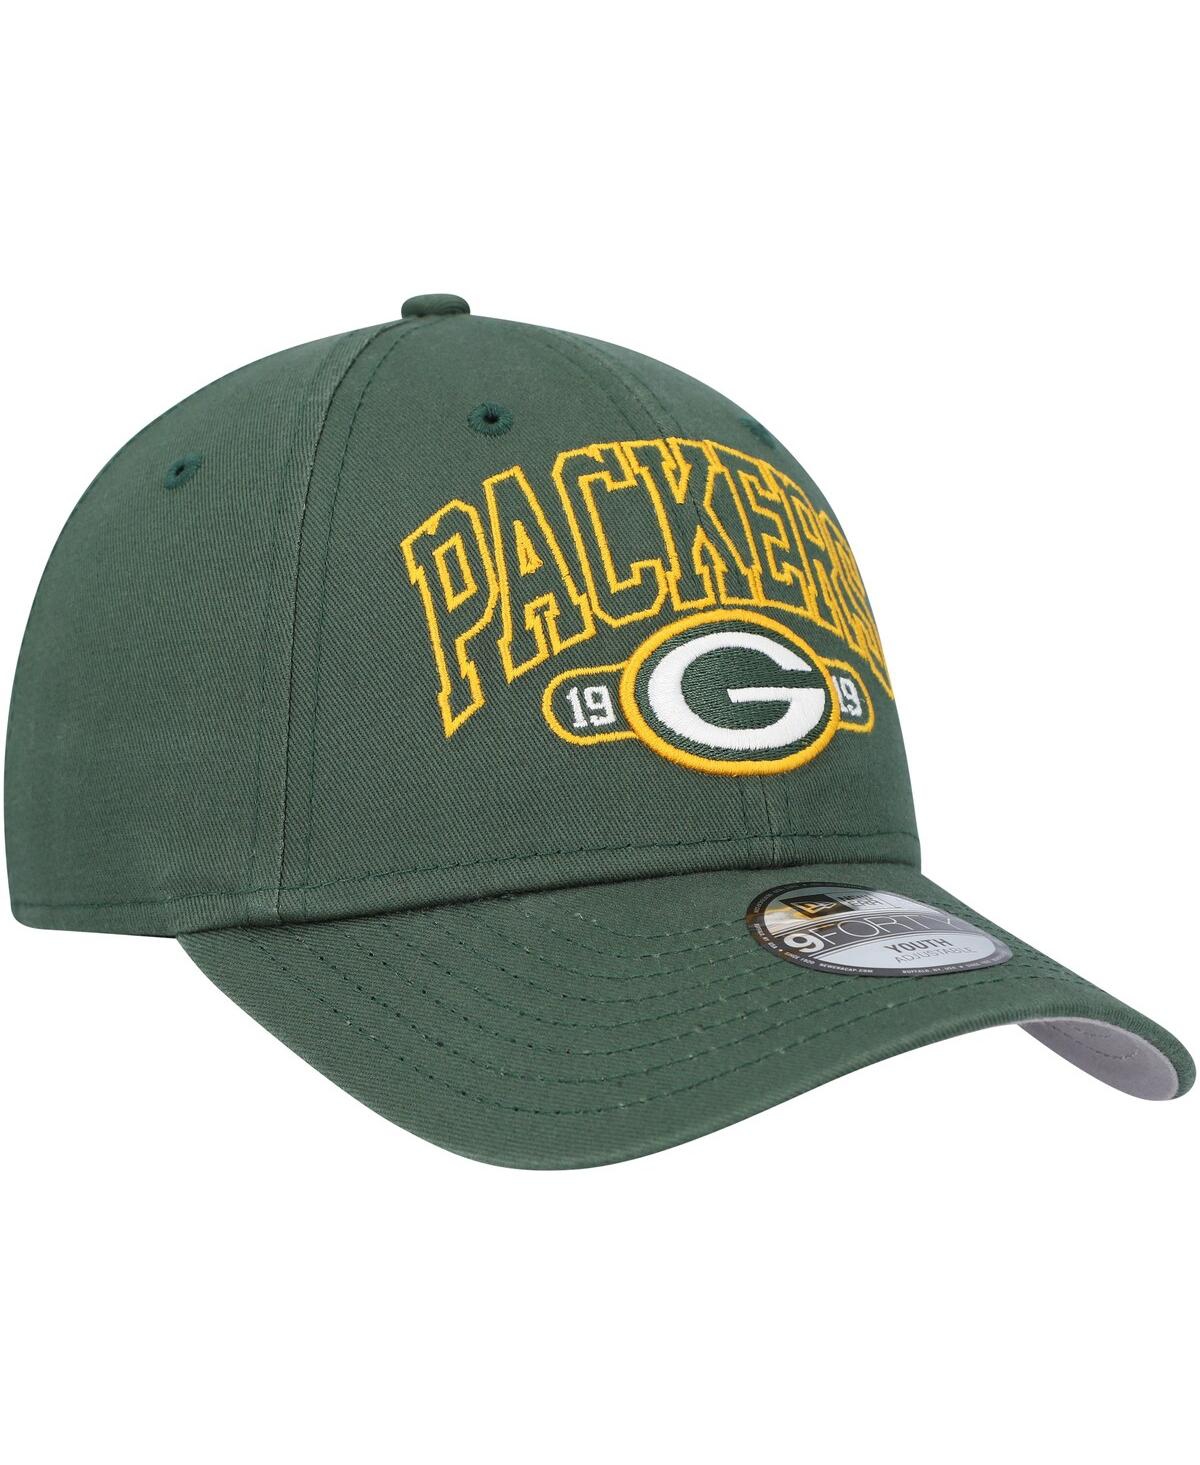 Shop New Era Youth Boys And Girls  Green Green Bay Packers Outline 9forty Adjustable Hat